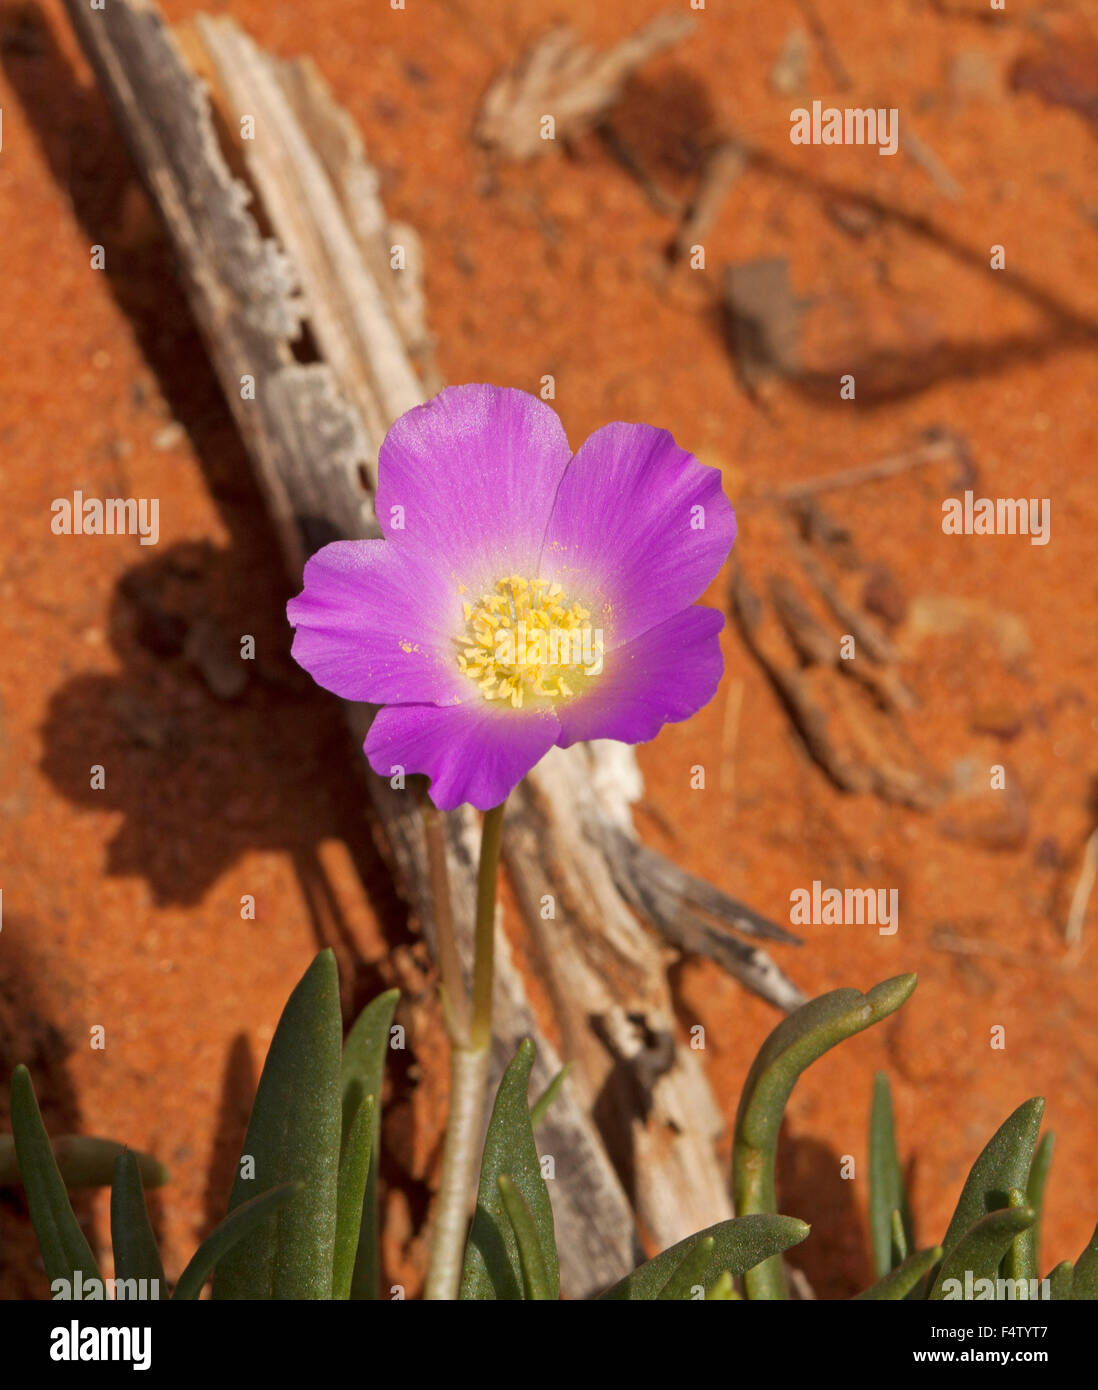 Vivid pink / mauve flower with creamy white centre of Calandrinia balonensis, parakeelya, against red soil of Australian outback Stock Photo